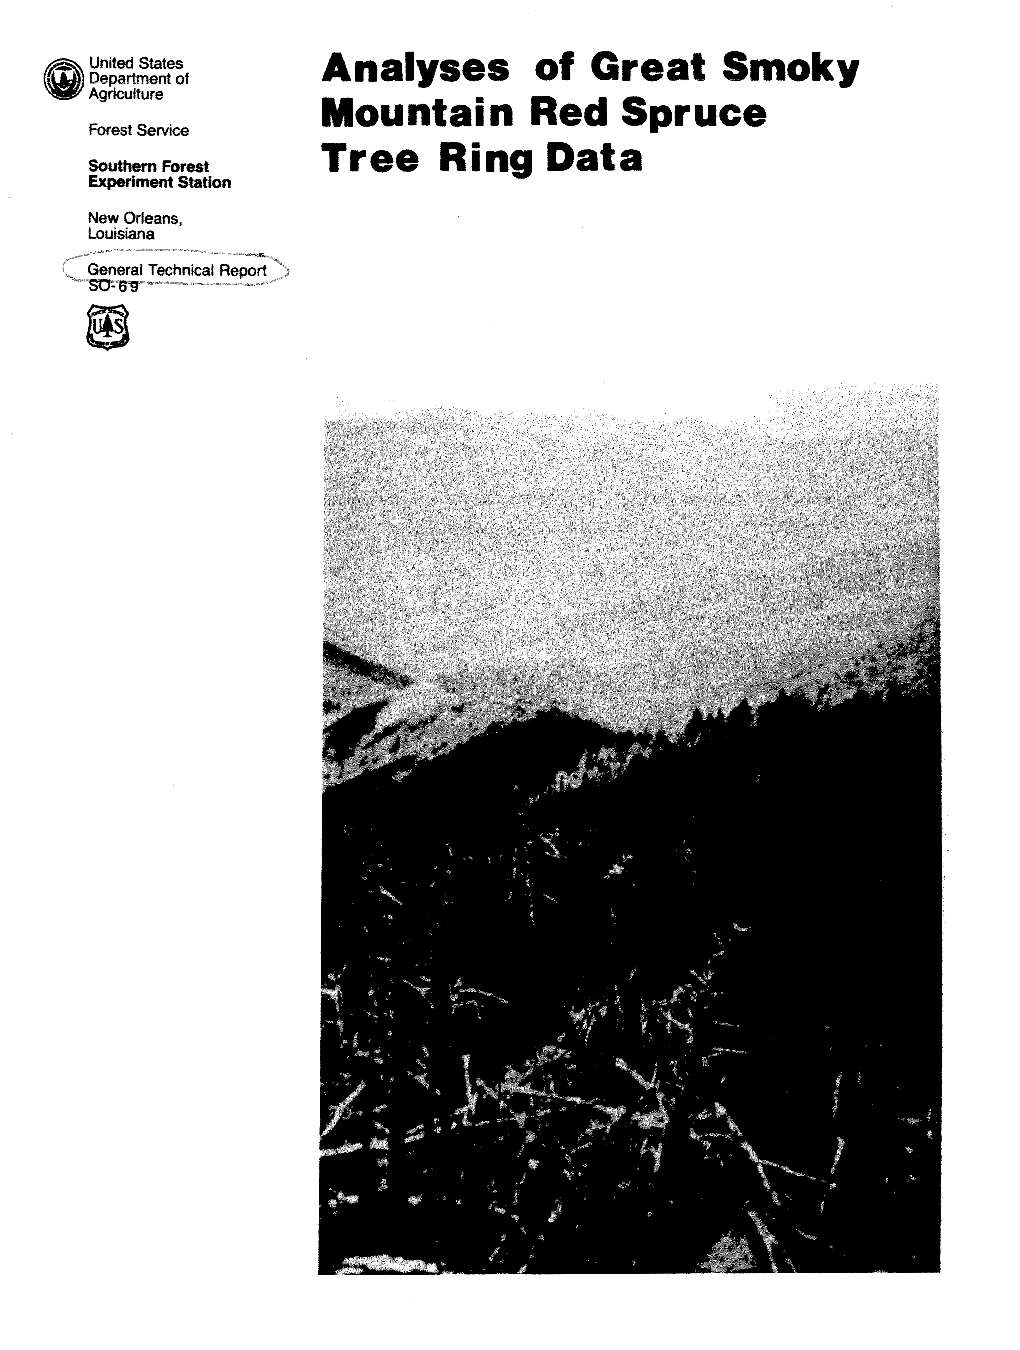 Analyses of Great Smoky Mountain Red Spruce Tree Ring Data